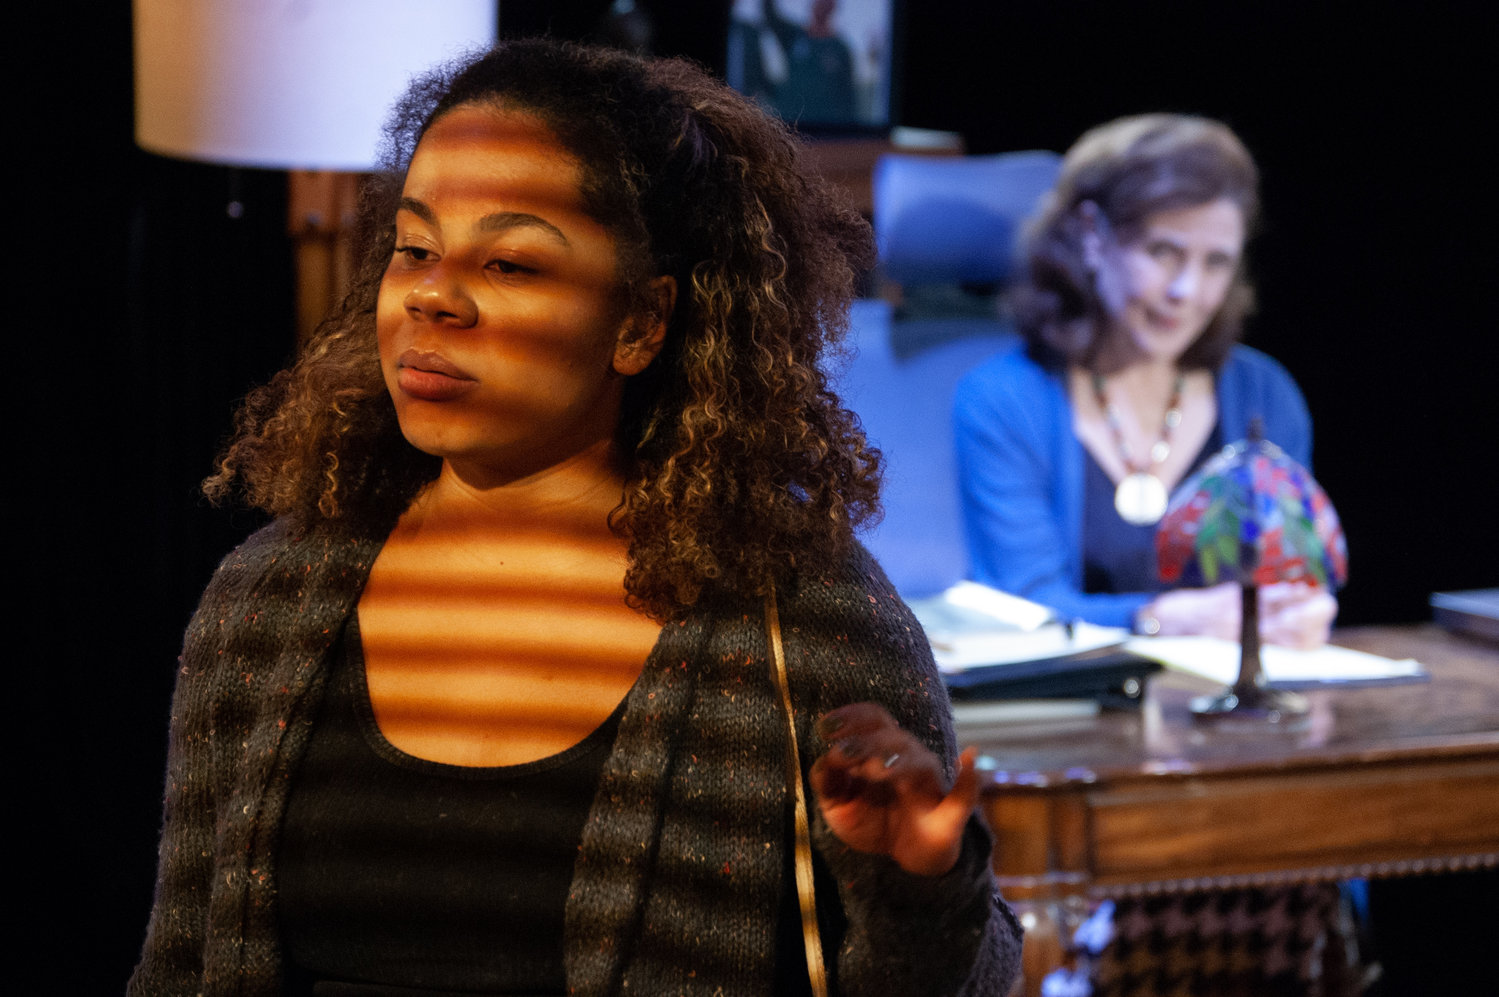 The play, written by Eleanor Burgess, involves a black student (Summer Ainsworth) who visits her white professor (Kate Konigisor) for a review of her thesis on the American Revolution.